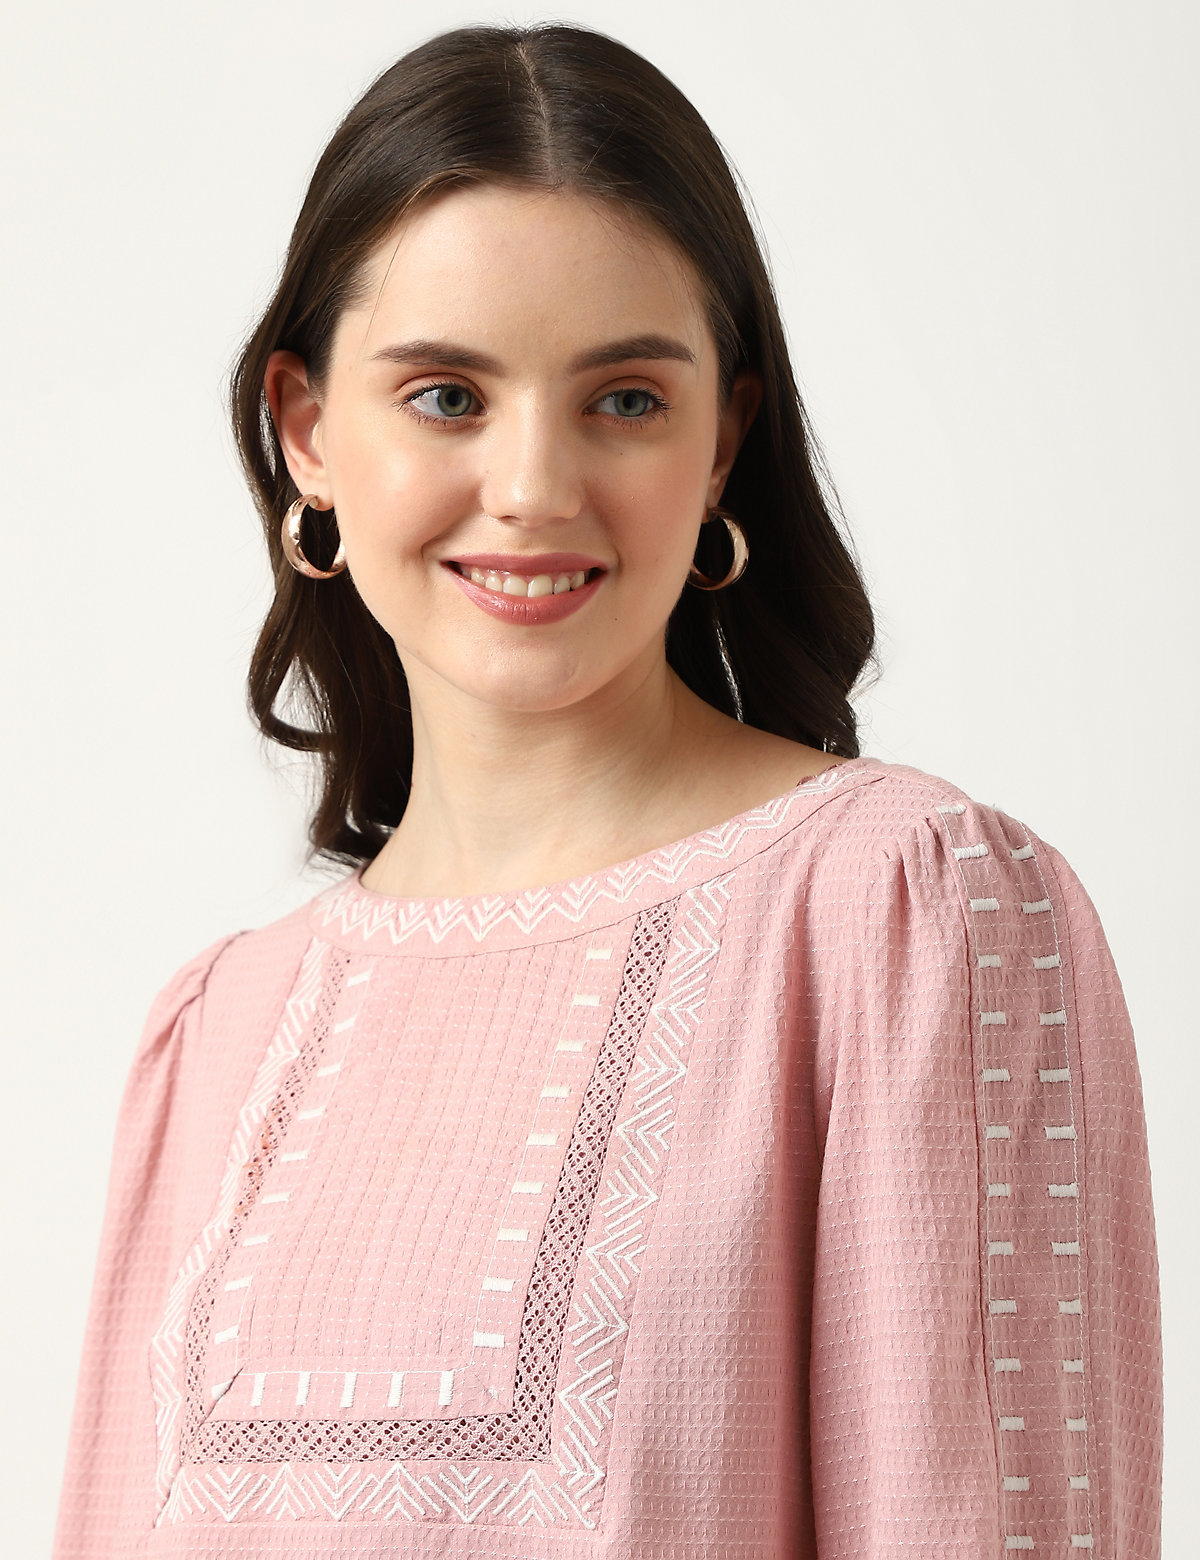 Viscose Mix Embroidered Round Neck Top